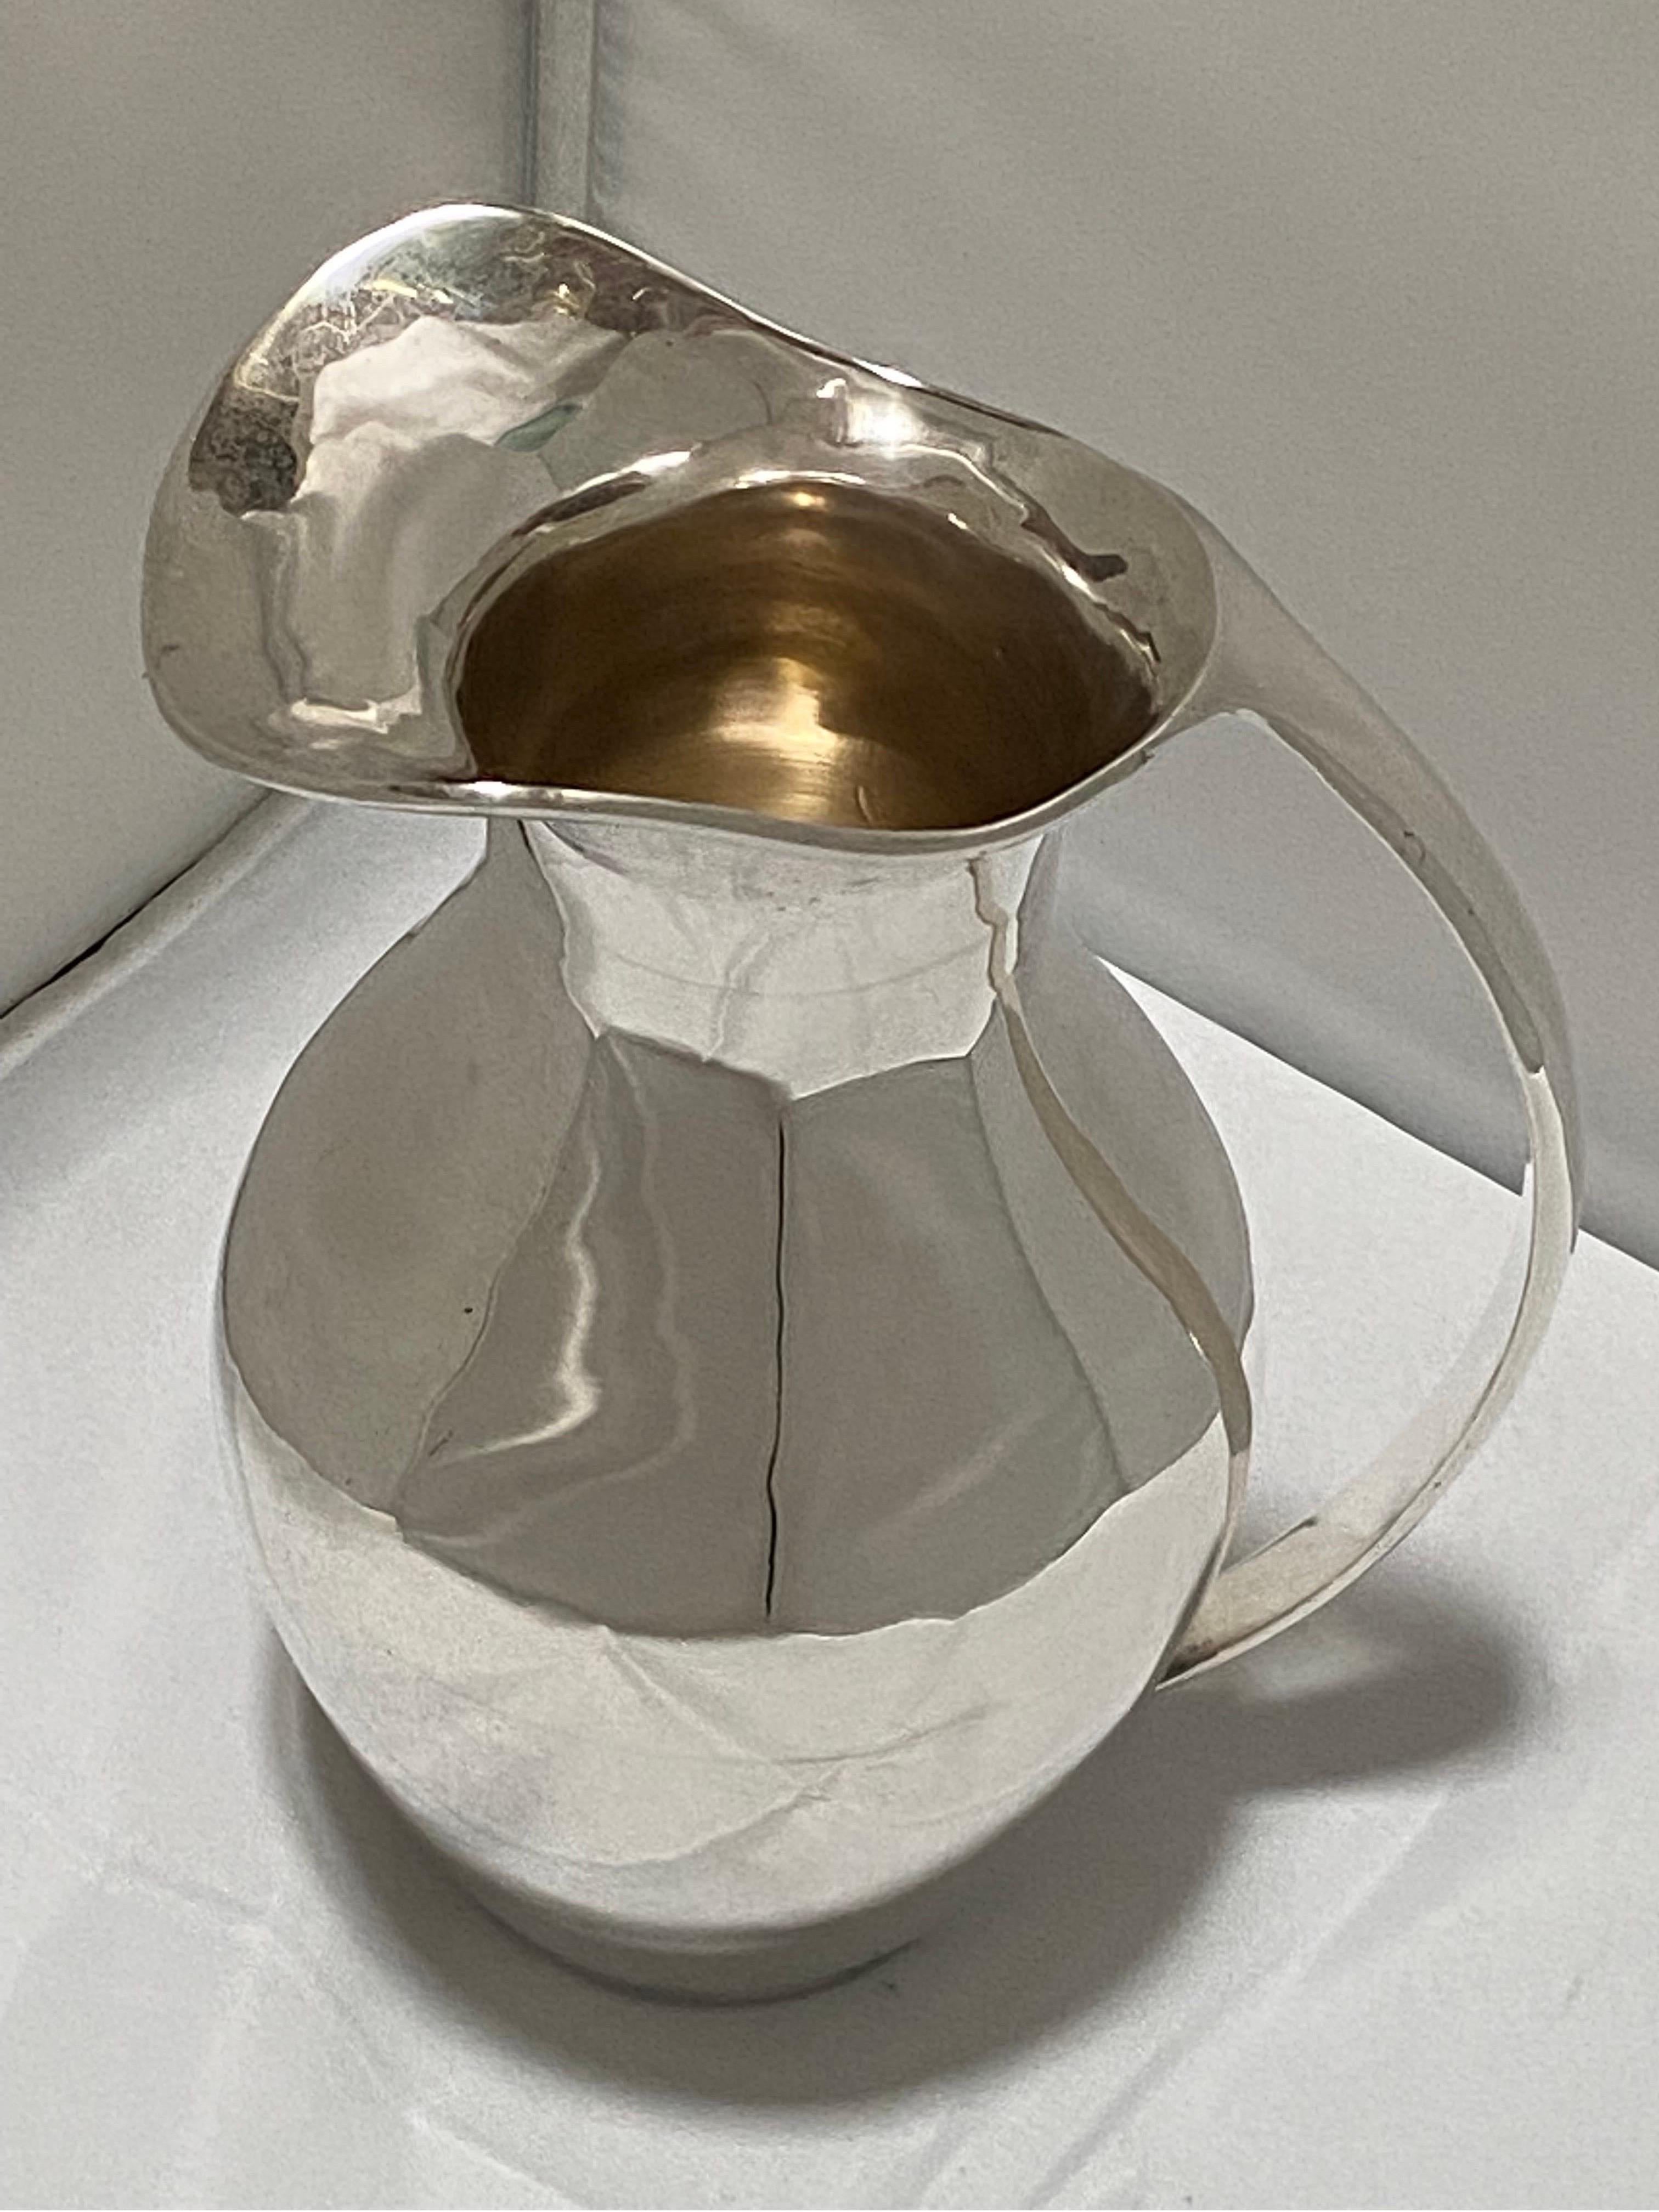 Vintage Mid-Century Mexican Sterling Silver Modernist Pitcher or Ewer by Zurita For Sale 2